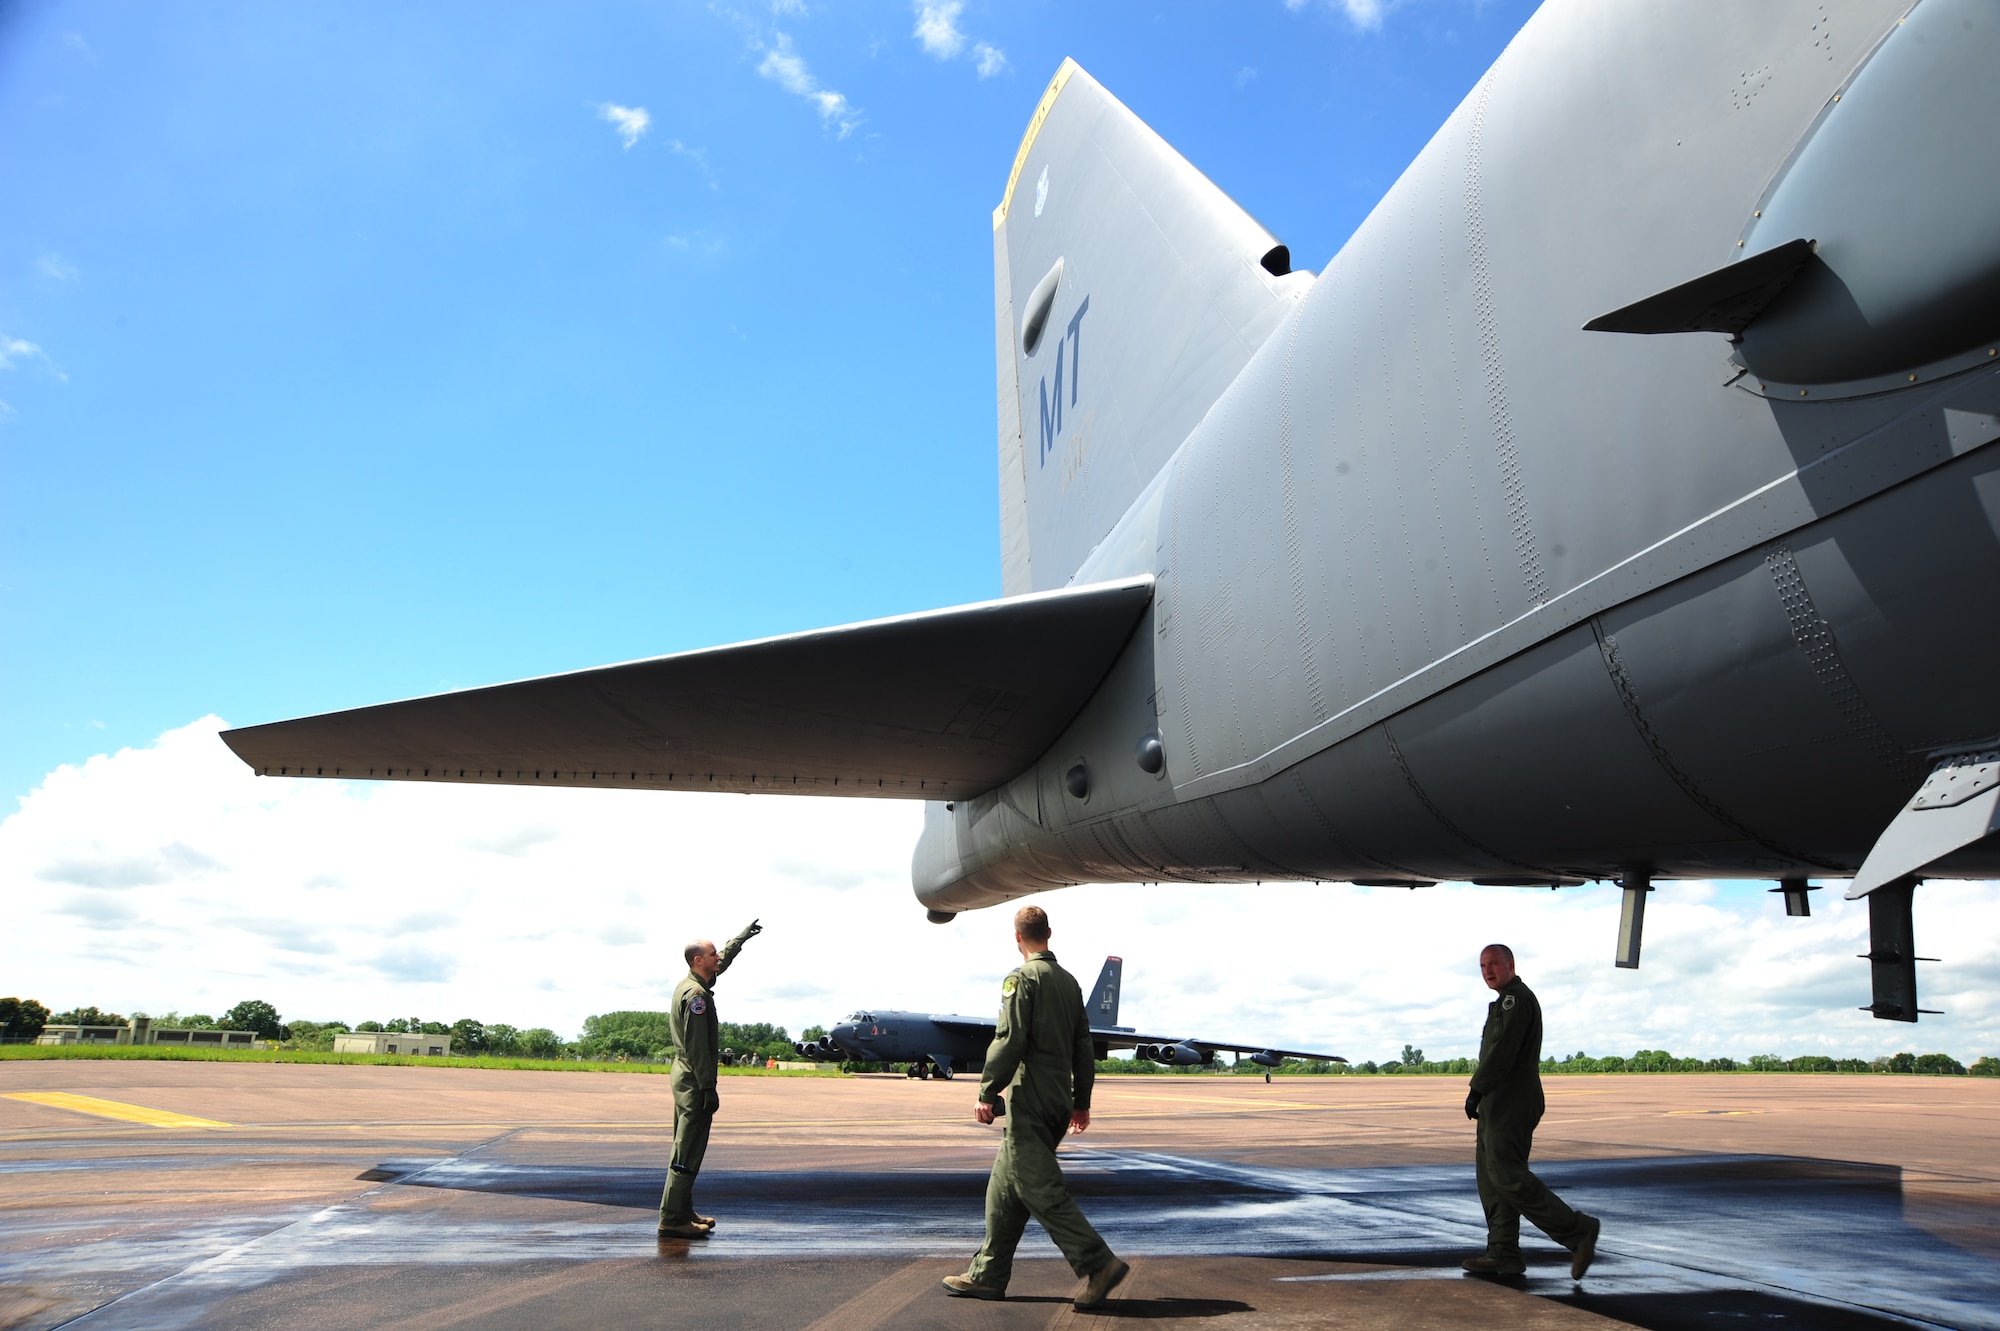 Maj. Steve Miracle, Capt. Andrew Paulsen and Capt. Rylan Kabanuck, B-52 Stratofortress crewmembers from the 5th Bomb Wing, Minot Air Force Base, N.D., perform a visual inspection on the tail of a B-52 at Royal Air Force Base Fairford, United Kingdom, June 7, 2014. The B-52 Stratofortress is a long-range, heavy bomber that can perform a variety of missions. The bomber is capable of flying at high subsonic speeds at altitudes up to 50,000 feet. (U.S. Air Force photo by Staff Sgt. Nick Wilson/Released)